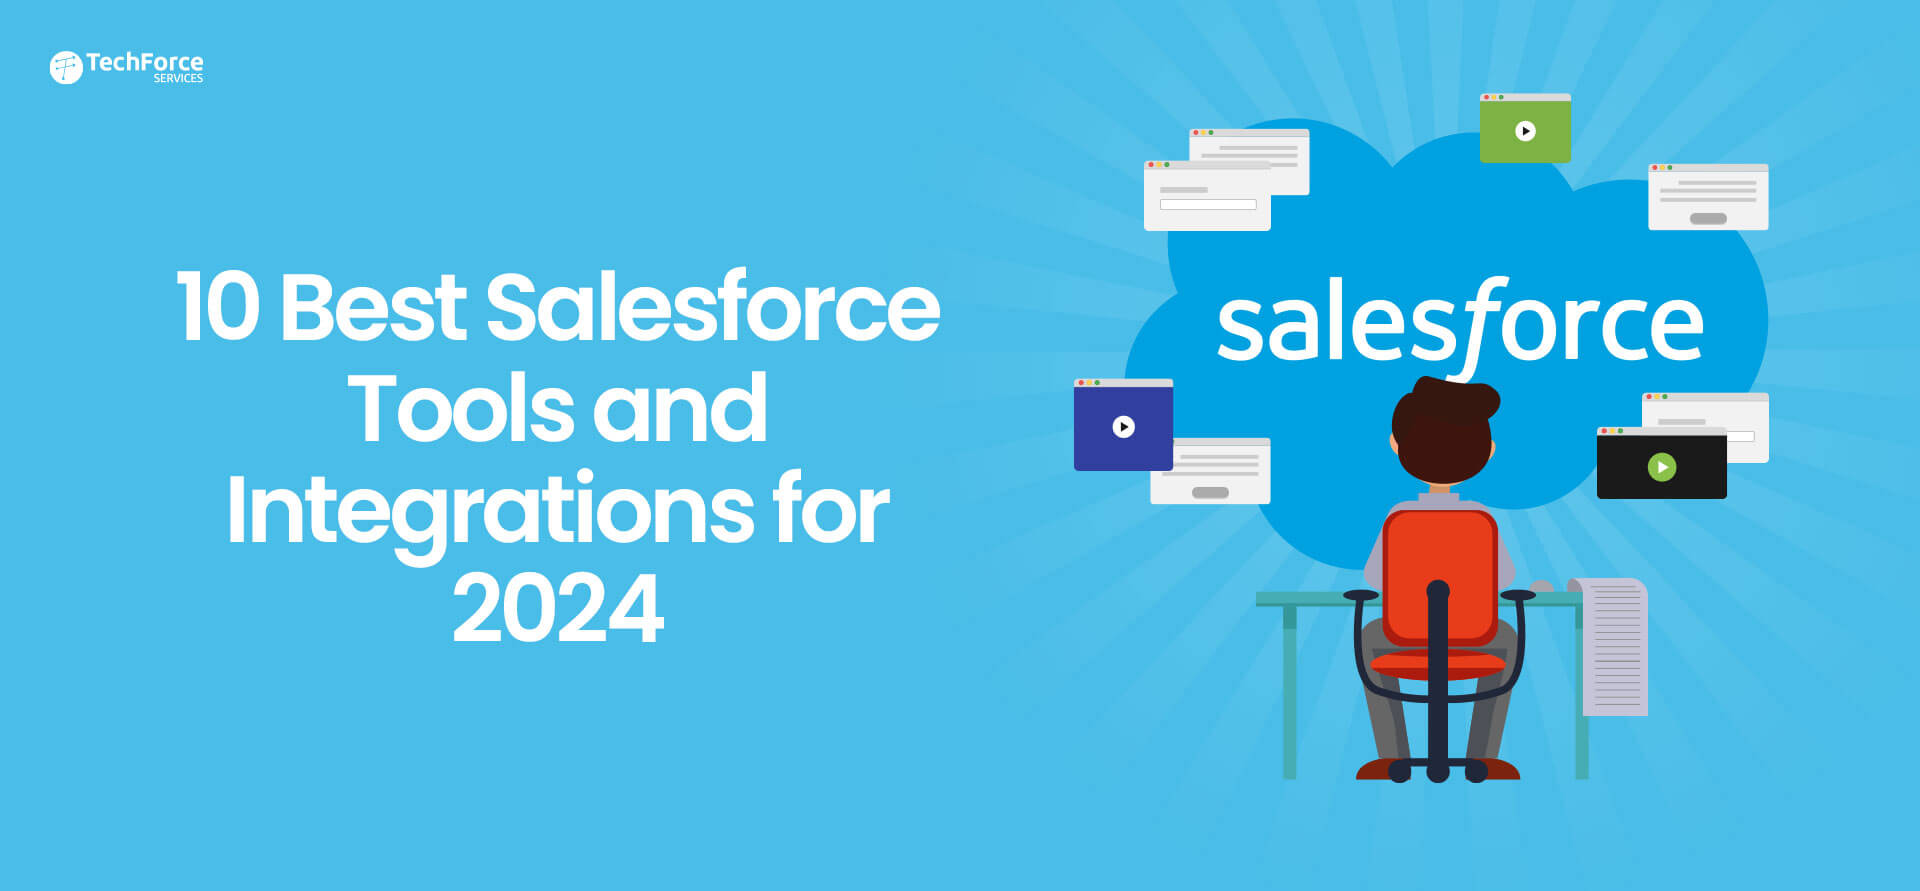 10-Best-Salesforce-Tools-and-Integrations-for-2024